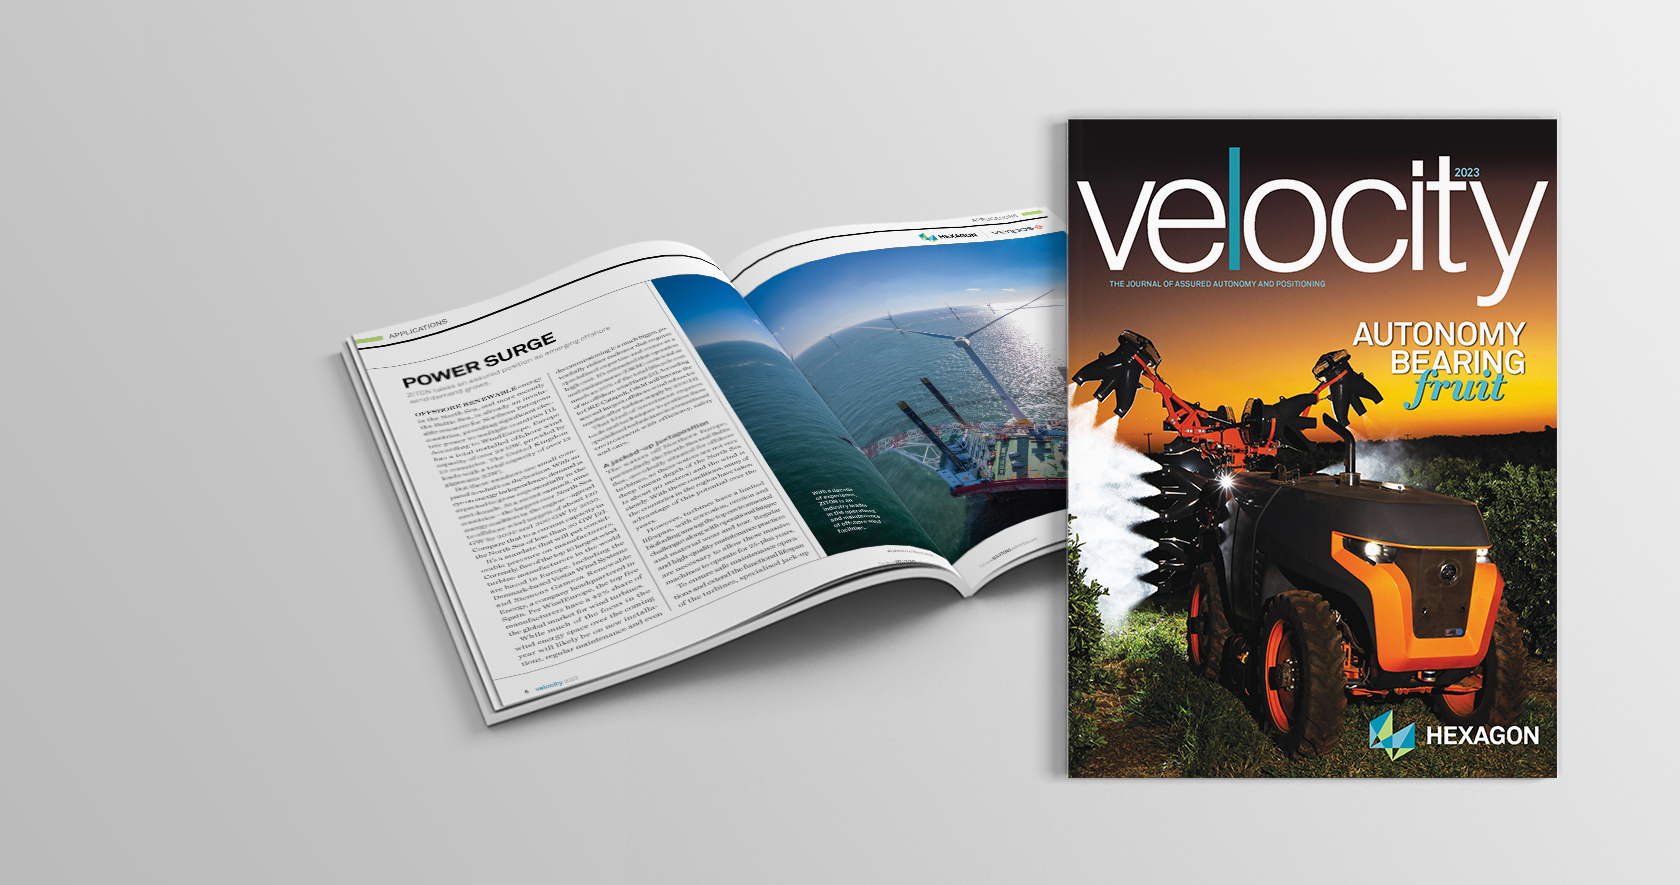 Velocity cover in front of an open copy of the magazine